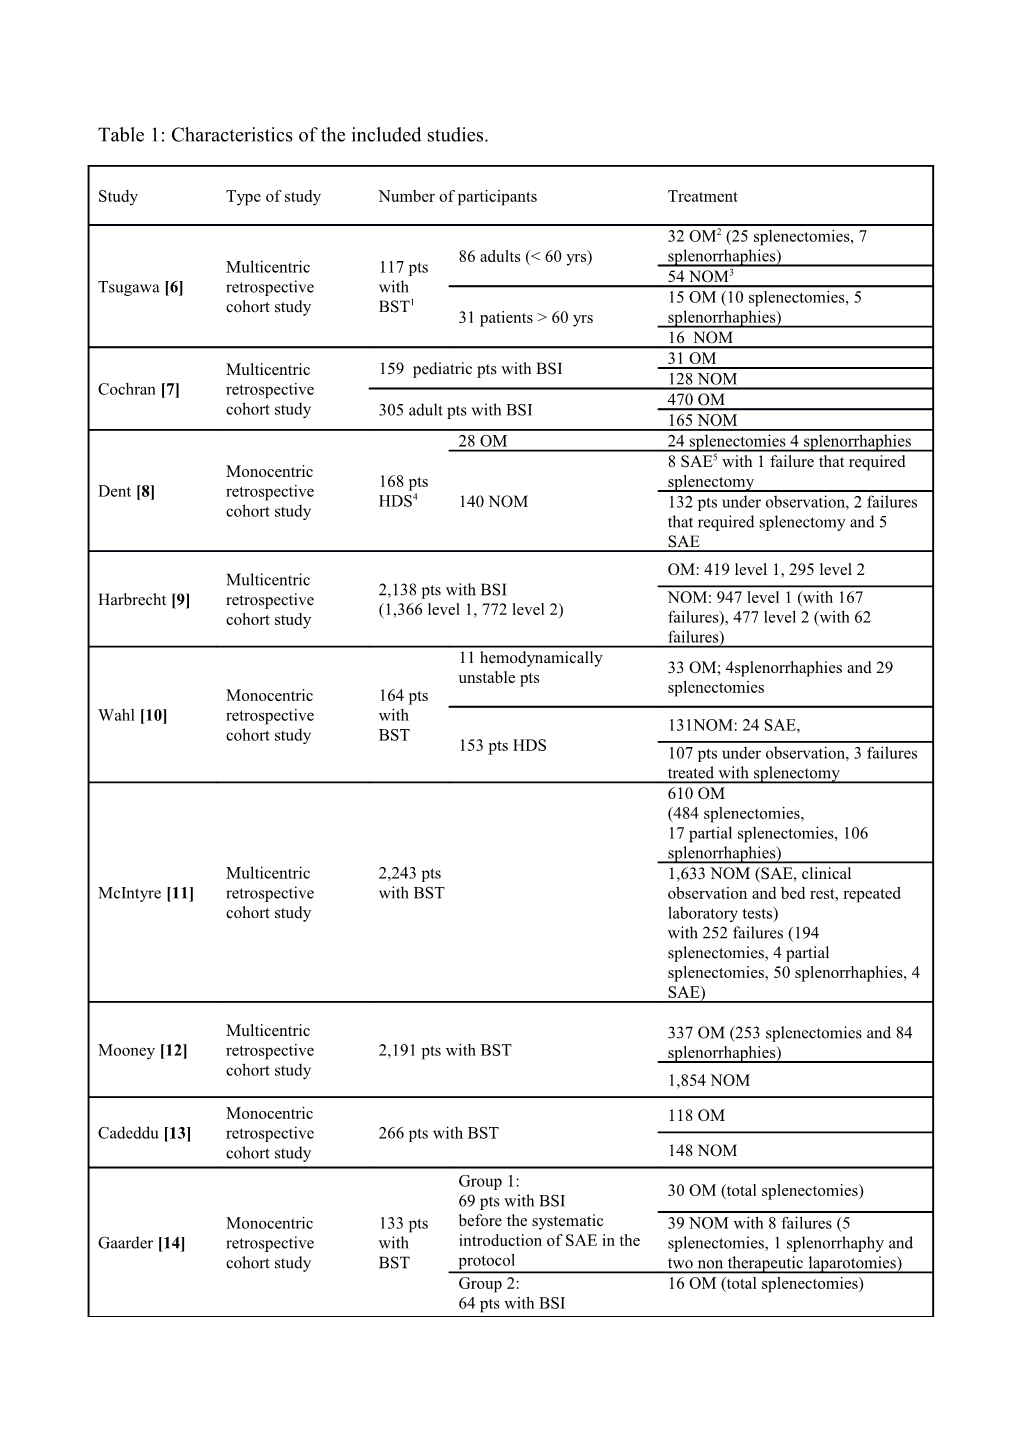 Table 1: Characteristics of the Included Studies